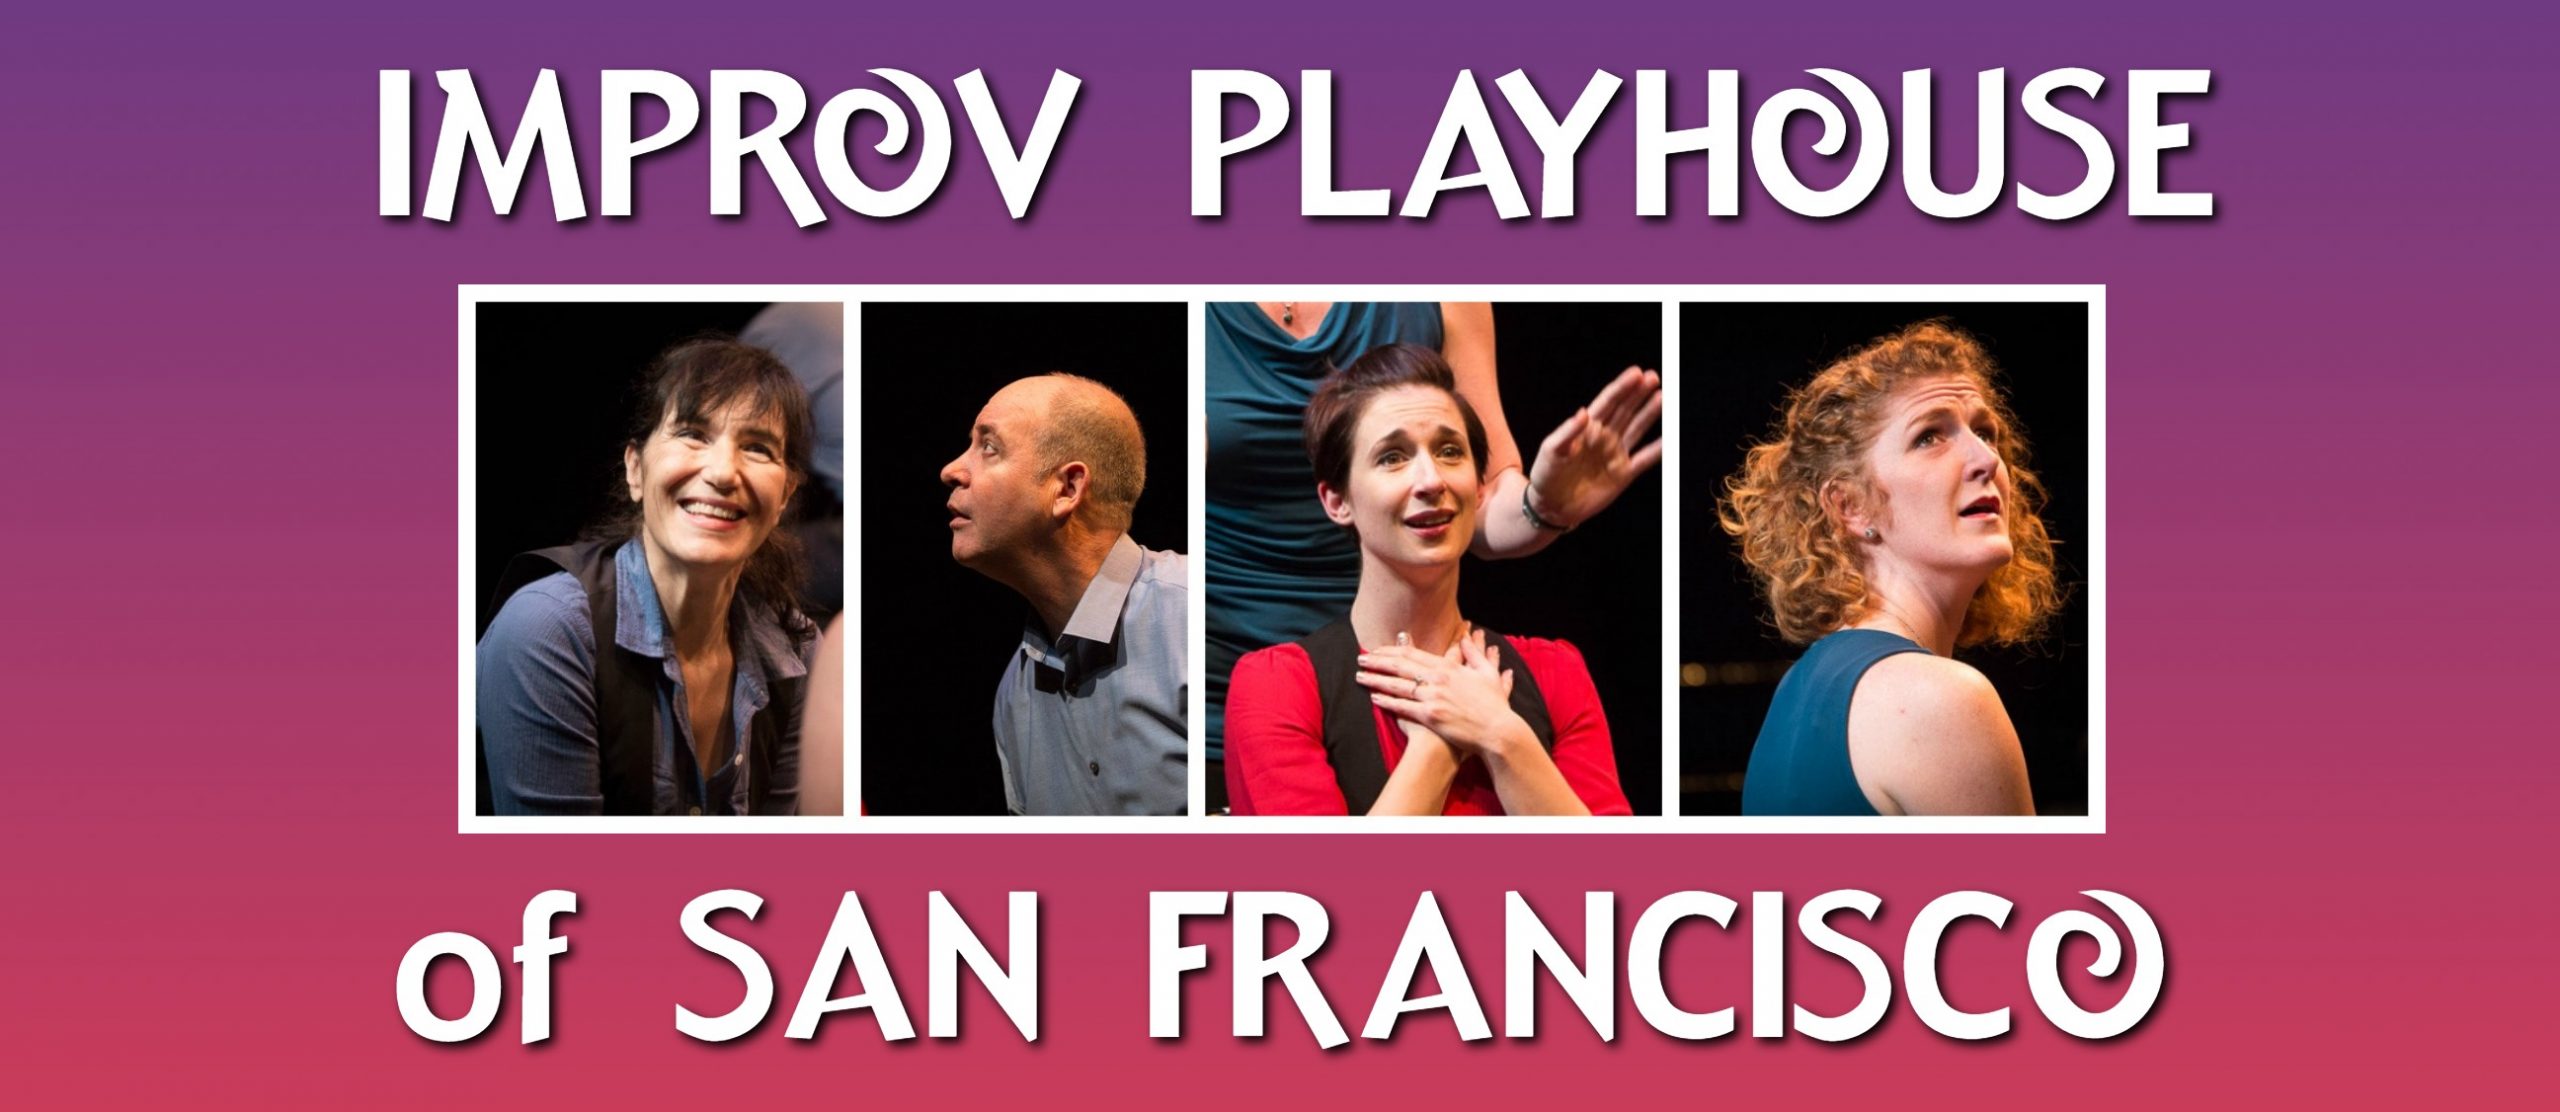 Improv Playhouse of San Francisco presents The Naked Stage